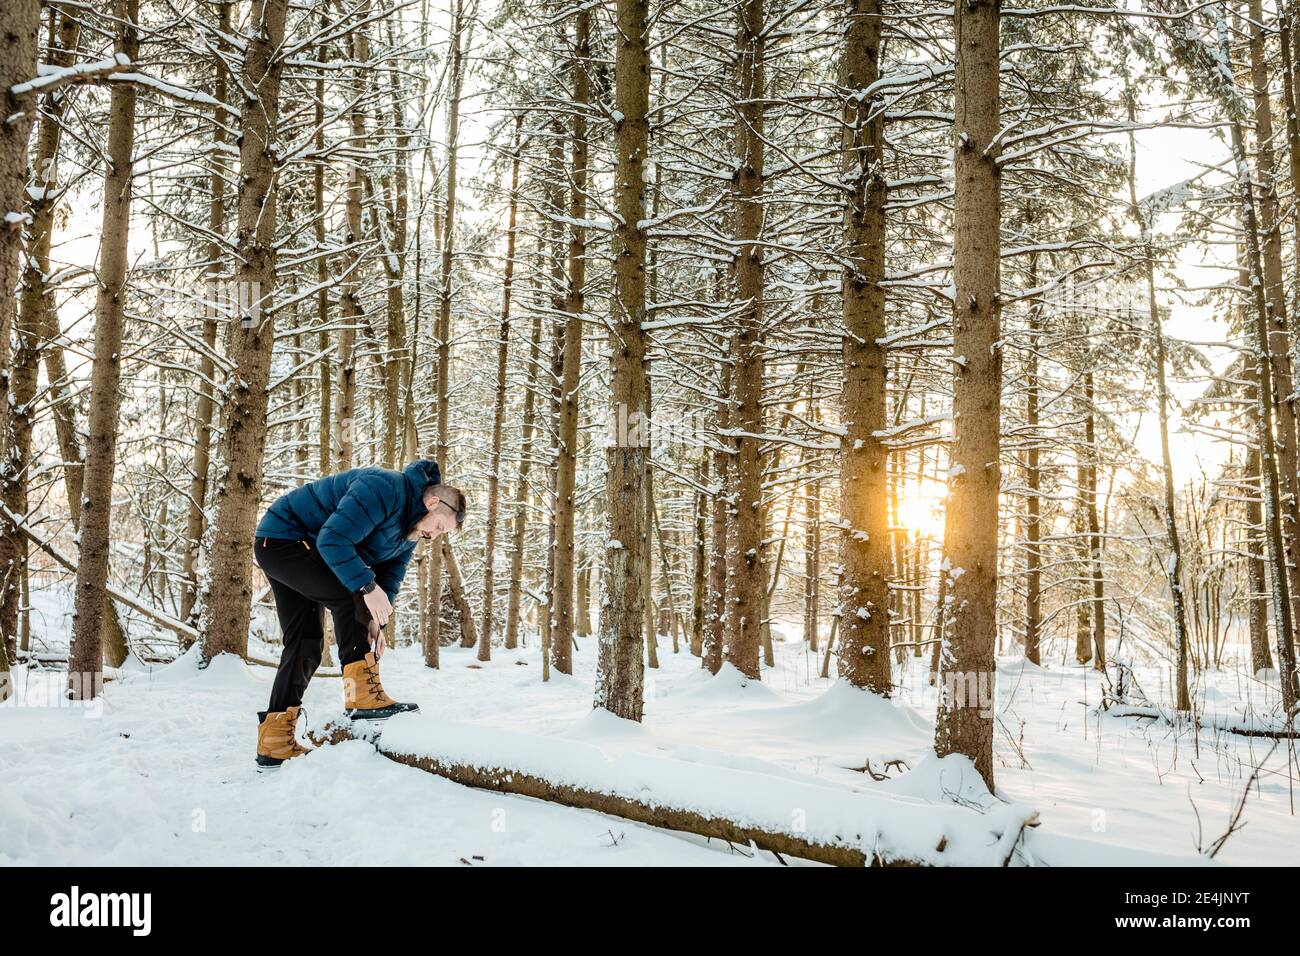 Man wearing warm clothing tying shoelace while standing at pine forest Stock Photo